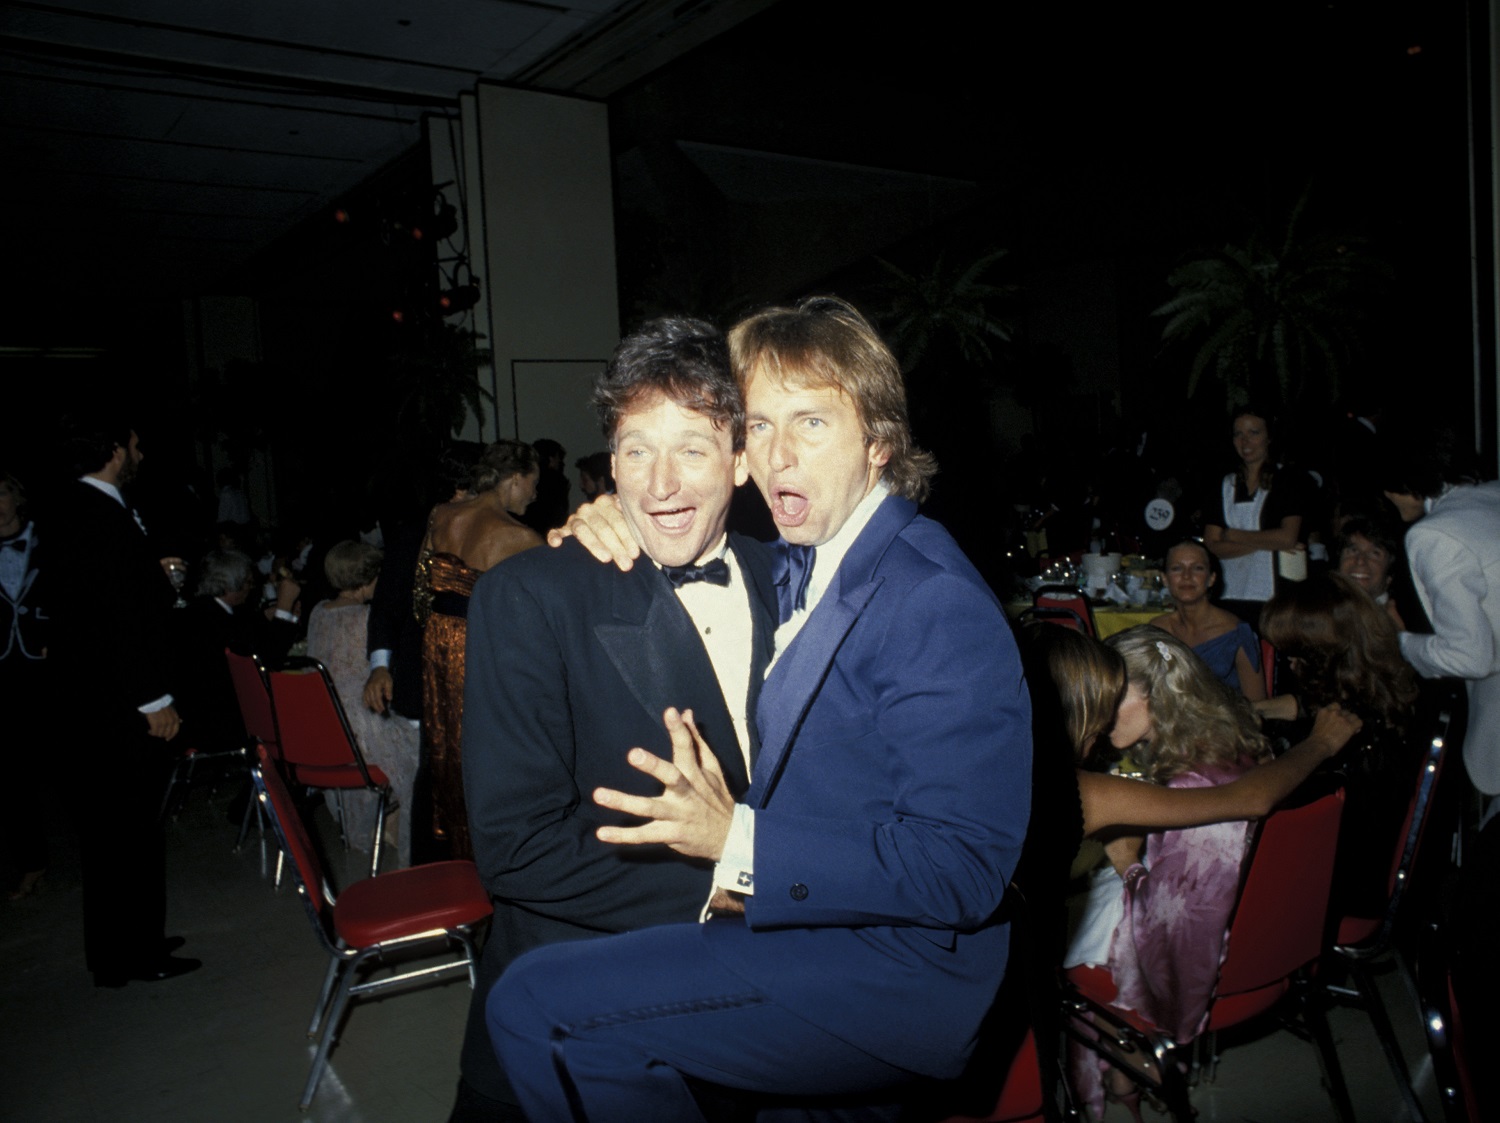 John Ritter and Robin Williams during 31st Annual Primetime Emmy Awards at Pasadena Civic Auditorium in Pasadena, California, United States. (Photo by Ron Galella/WireImage)